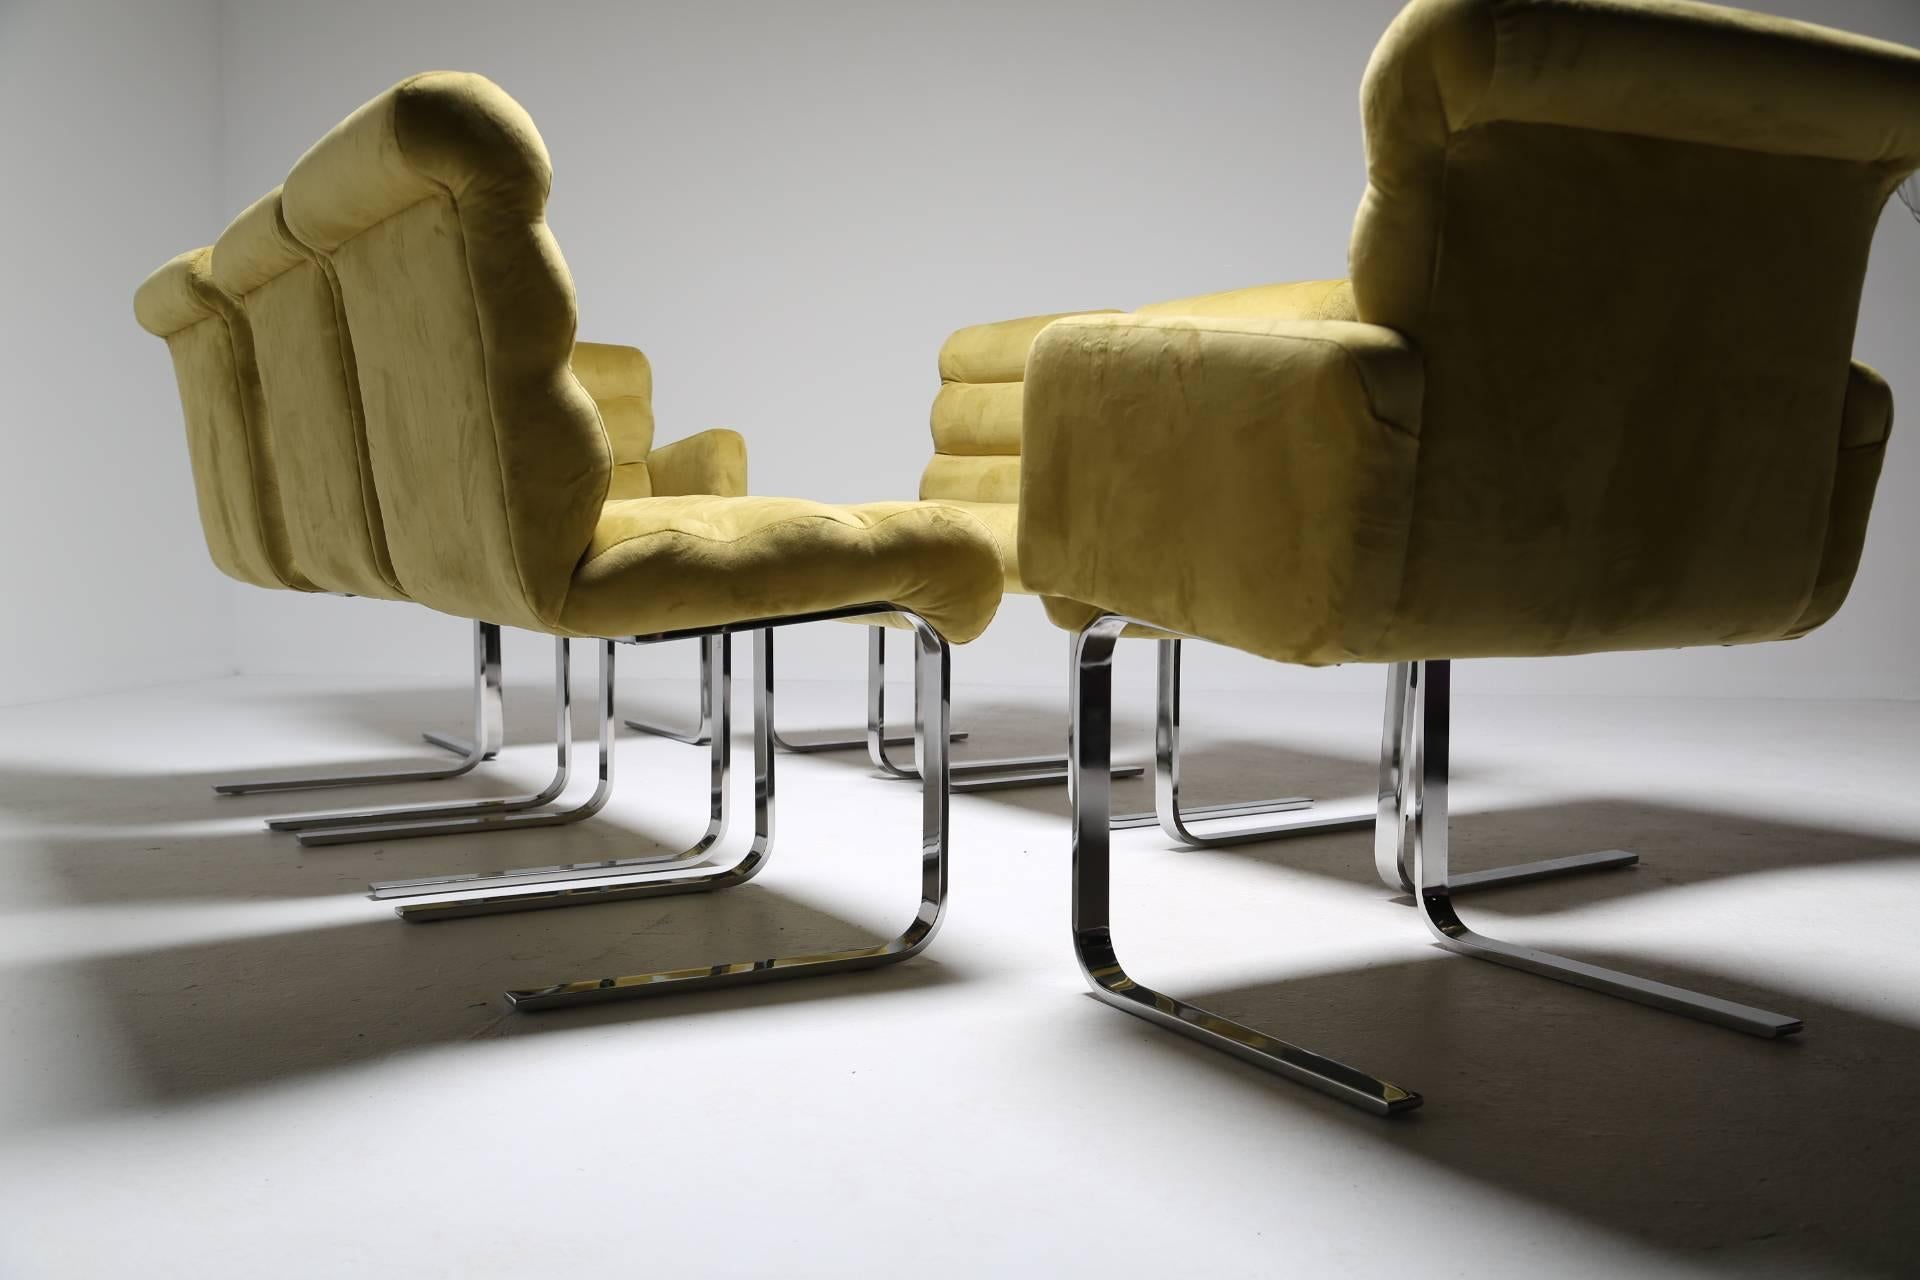 Chrome Mid-Century Modern Dining Chairs by Pace Collection